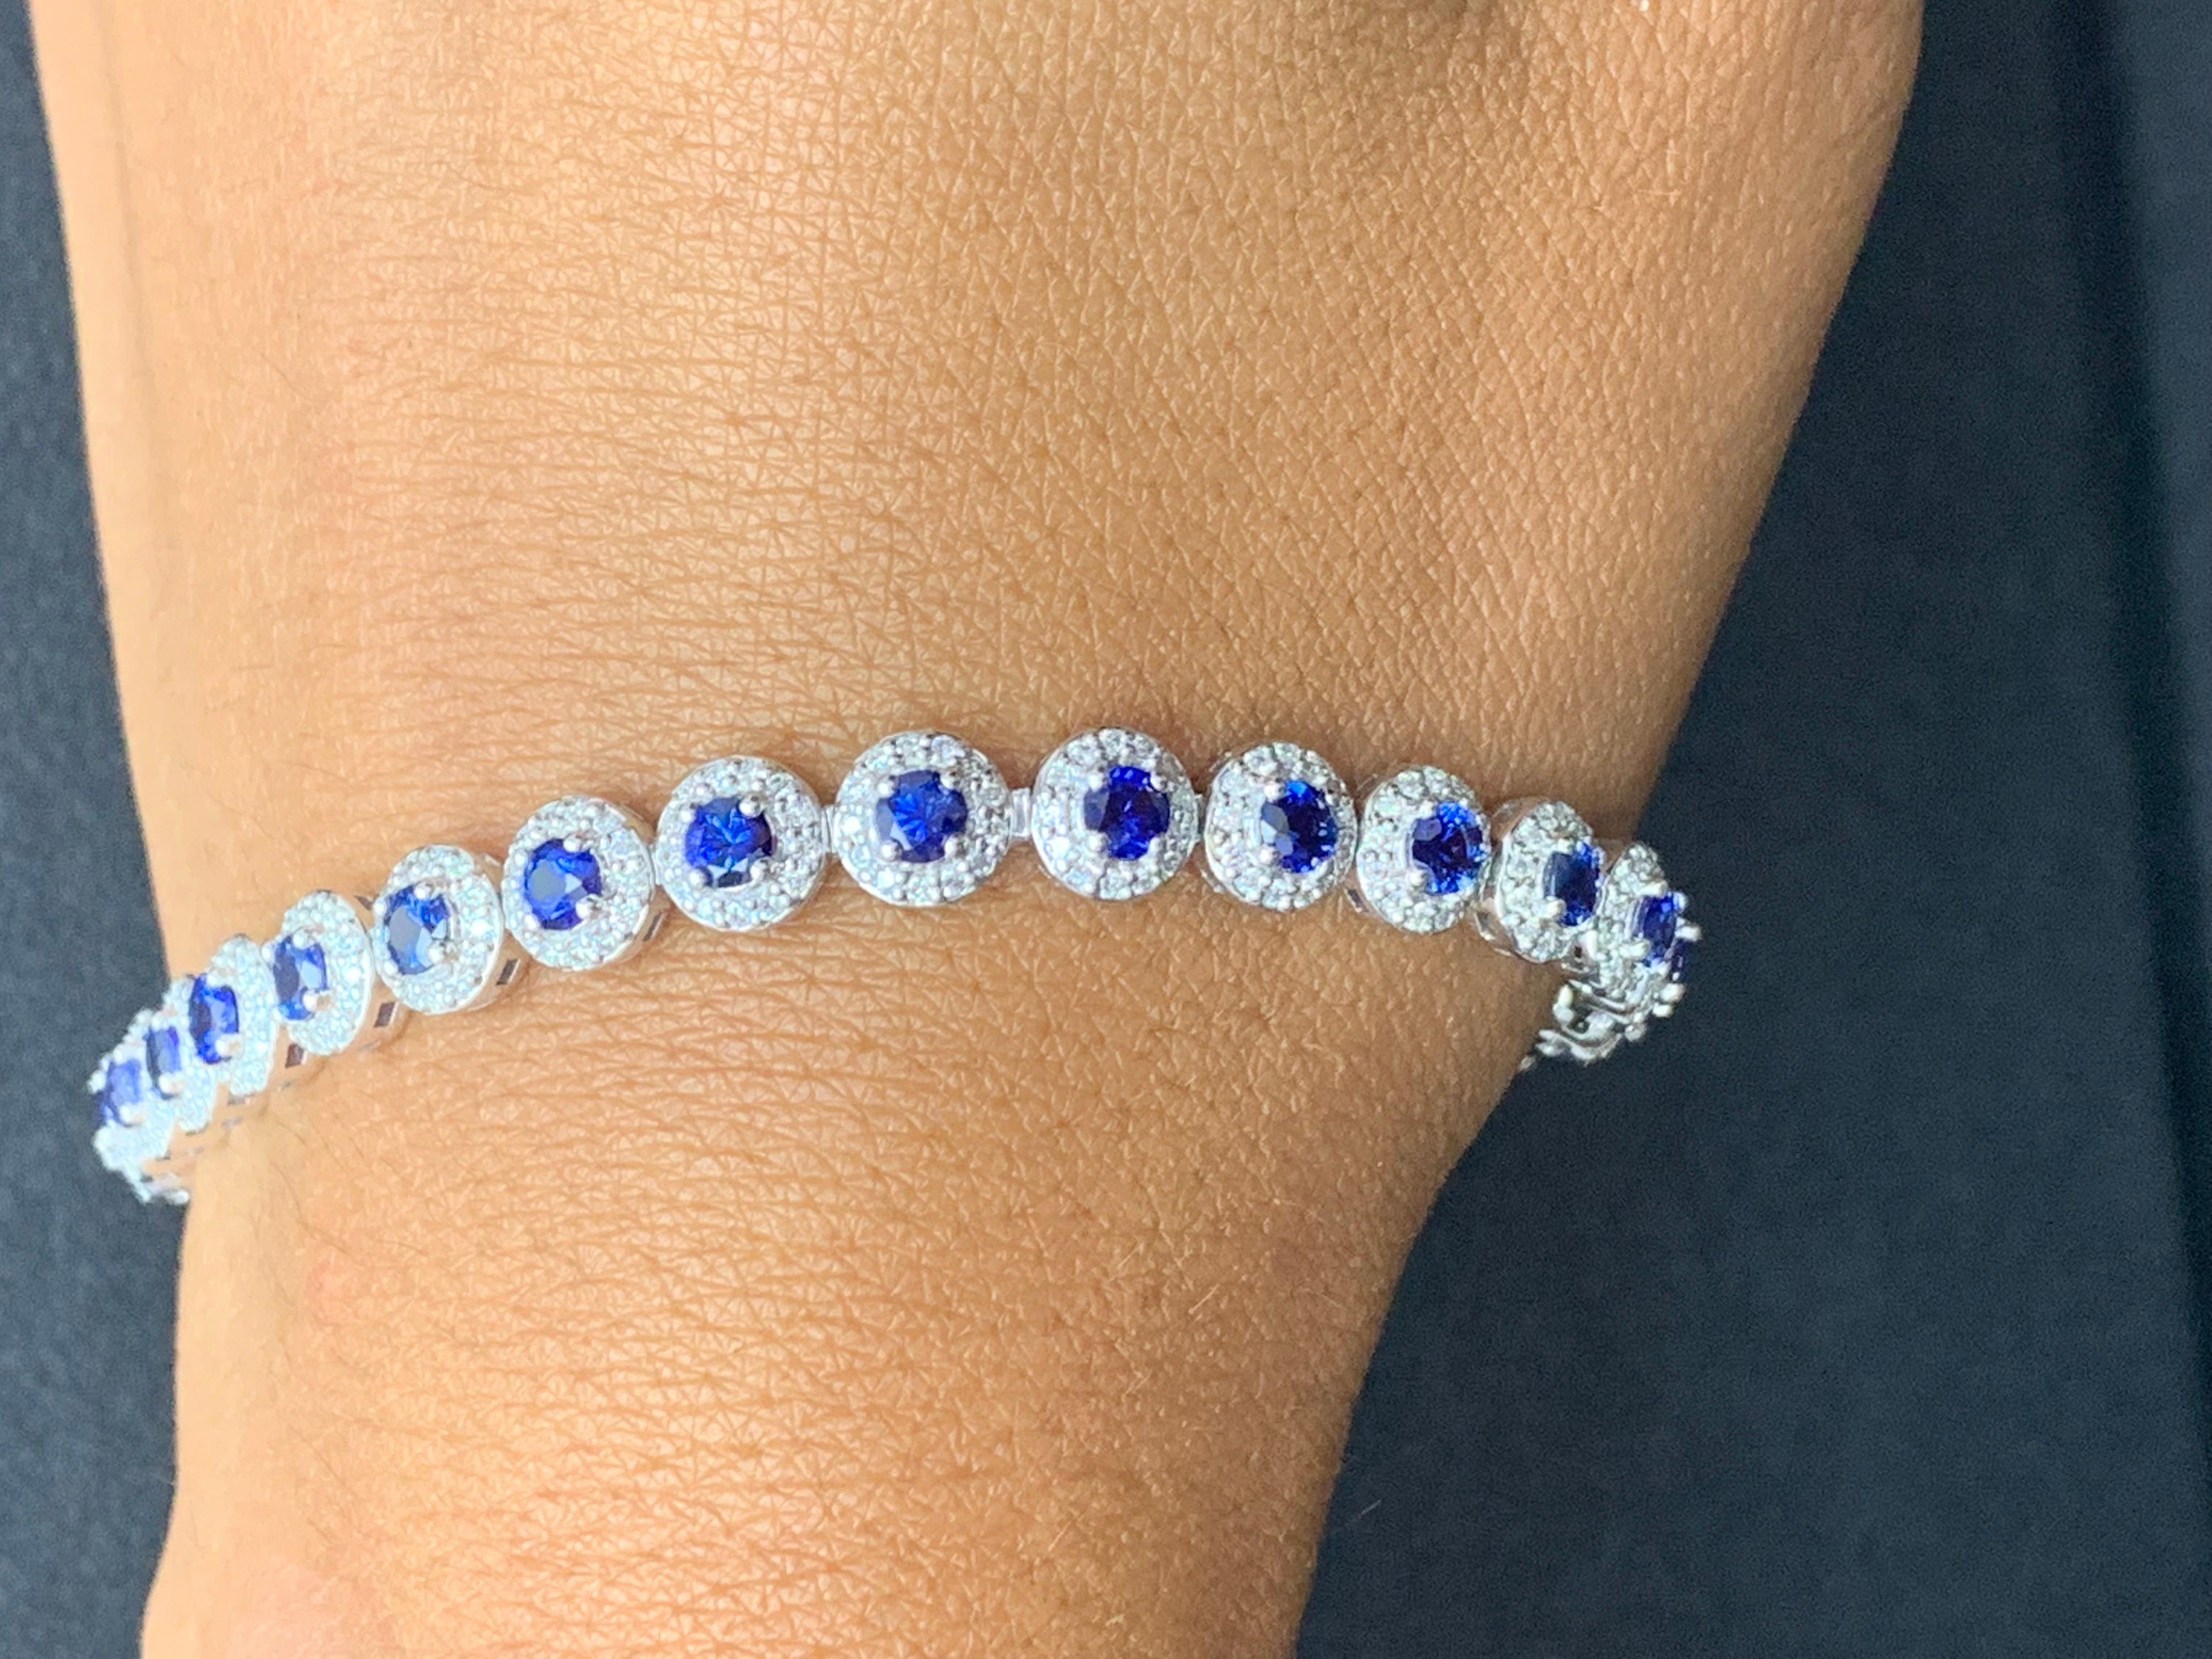 4.40 Carat Round Cut Sapphire and Diamond Tennis Bracelet in 14K White Gold For Sale 6